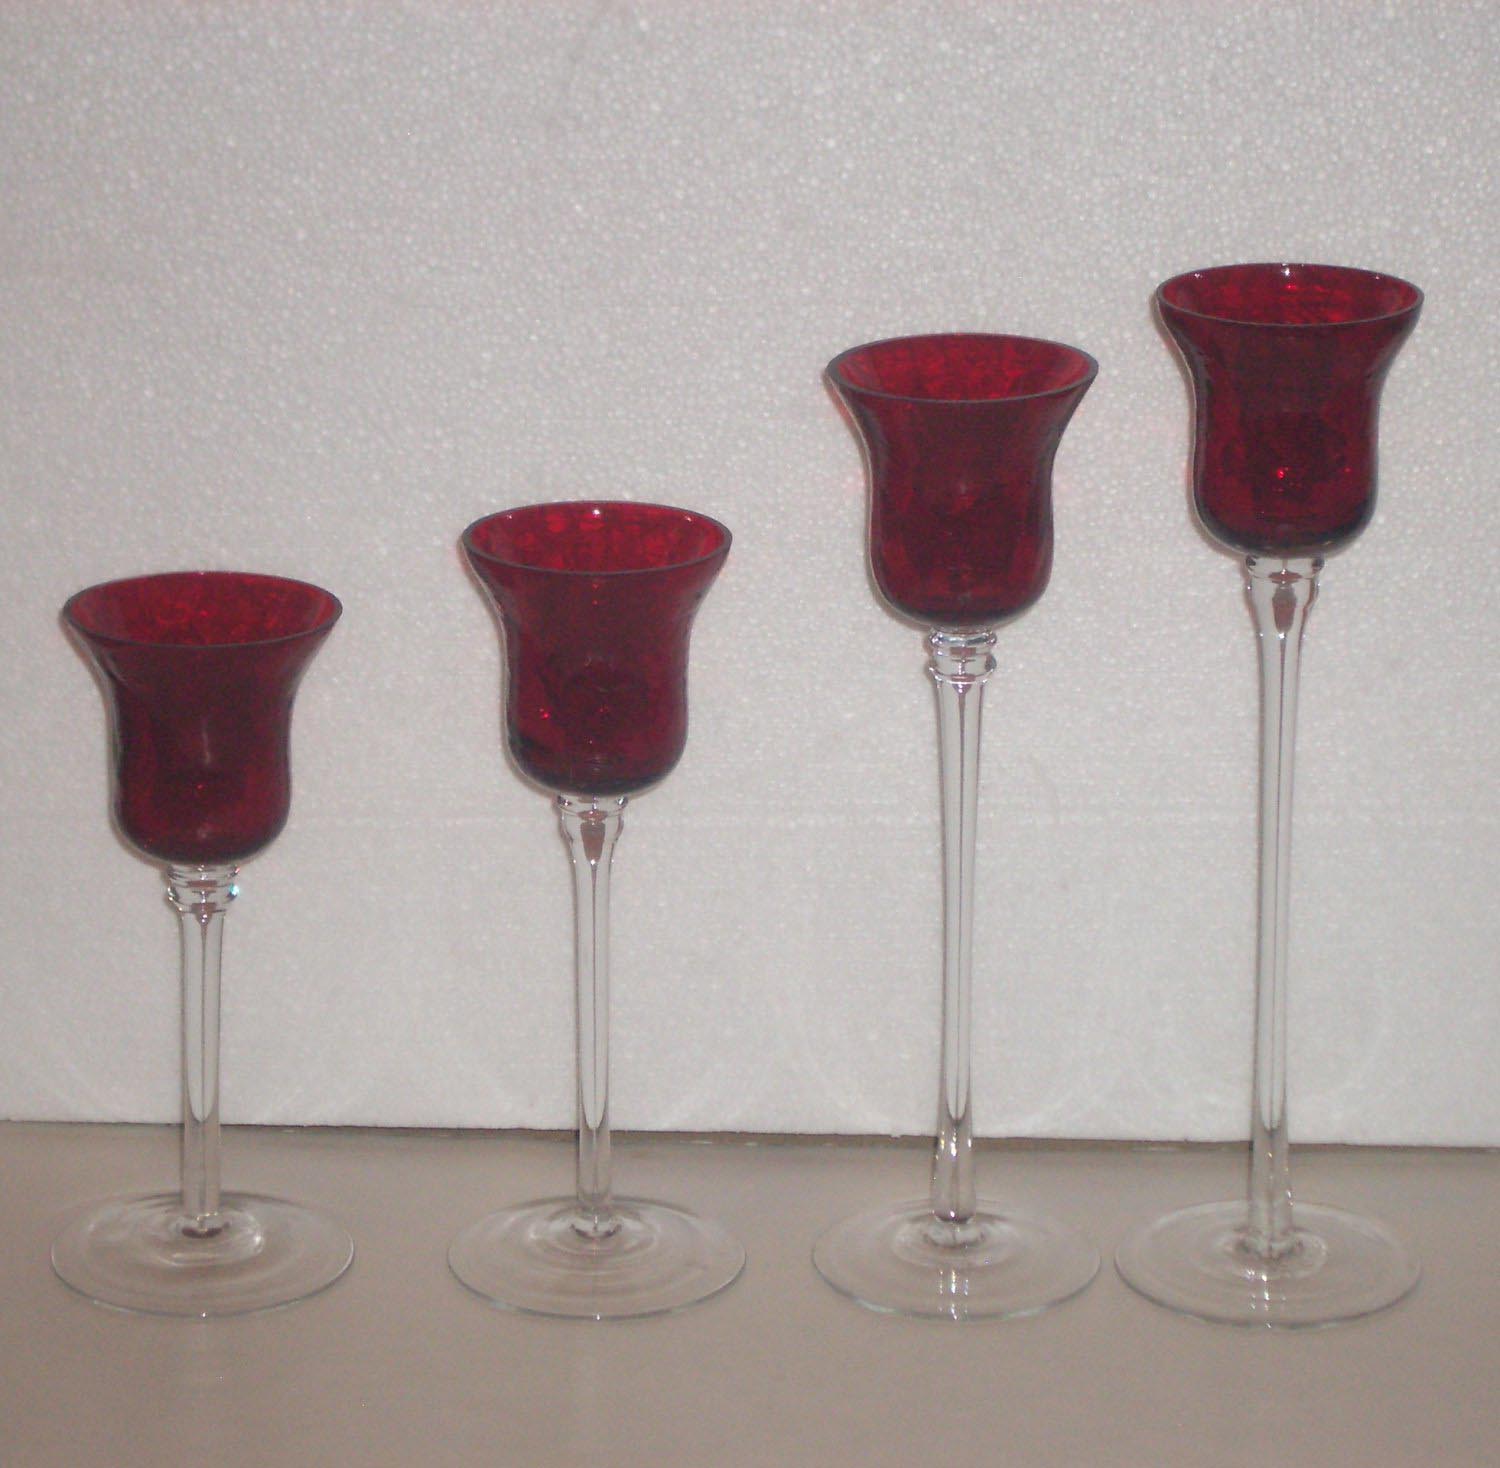 tall votive candles